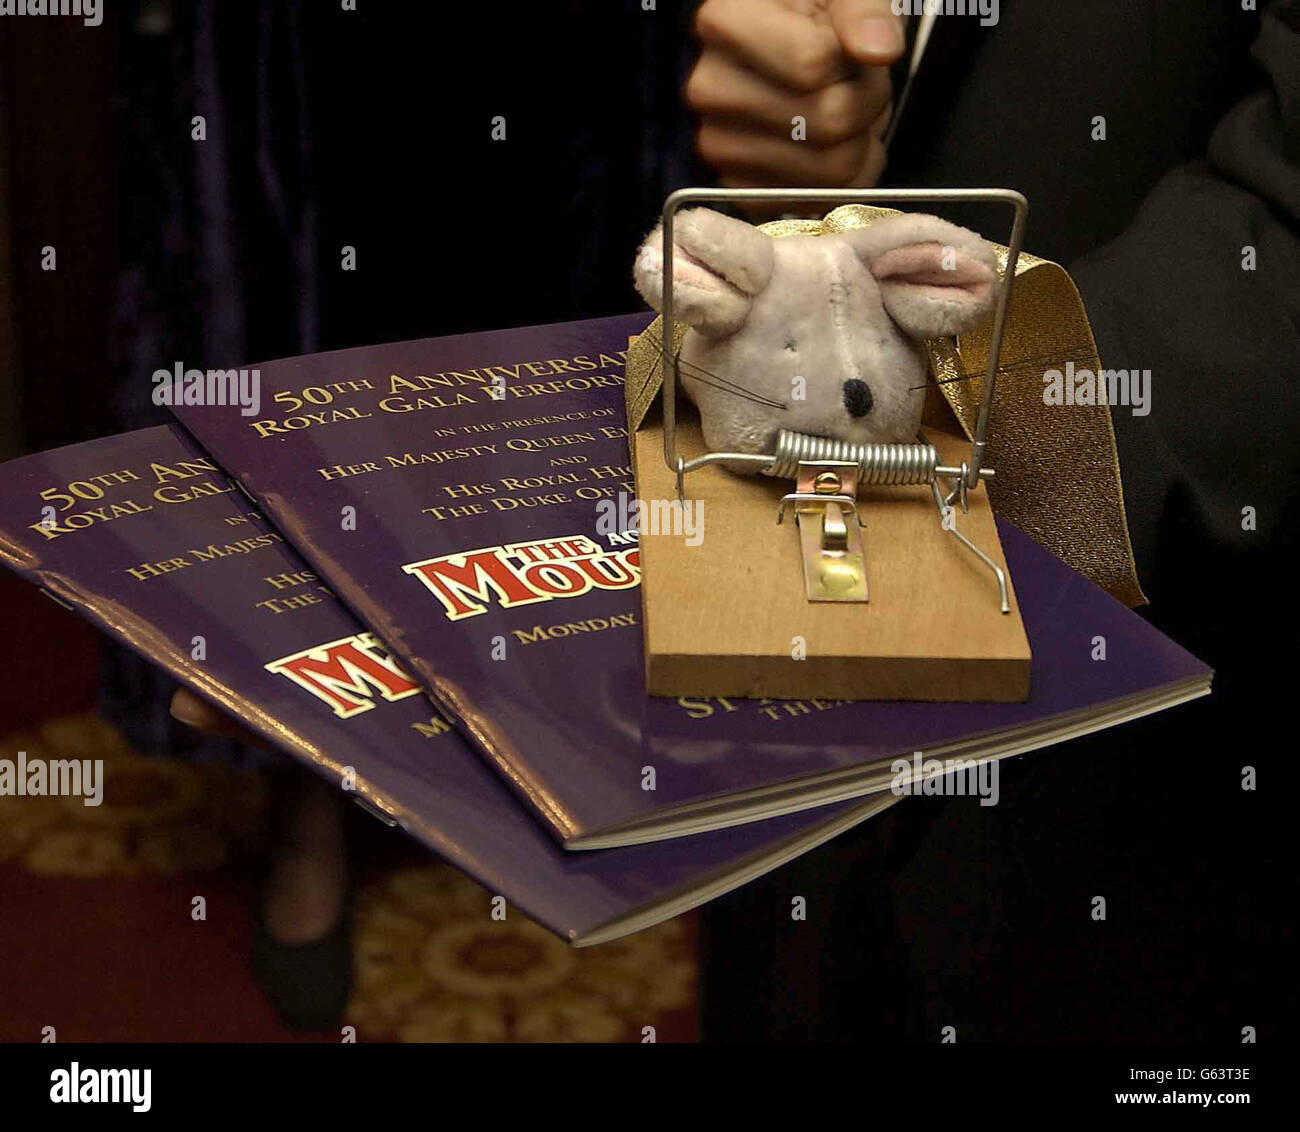 The programme and mousetrap presented to Britain's Queen Elizabeth II at the 50th anniversary of the world's longest-running play, The Mousetrap, at St Martin's Theatre, London. *..Agatha Christie's famous whodunit , the first stage production to achieve a golden jubilee, opened on November 25, 1952, 10 months after the Queen came to the throne. Stock Photo